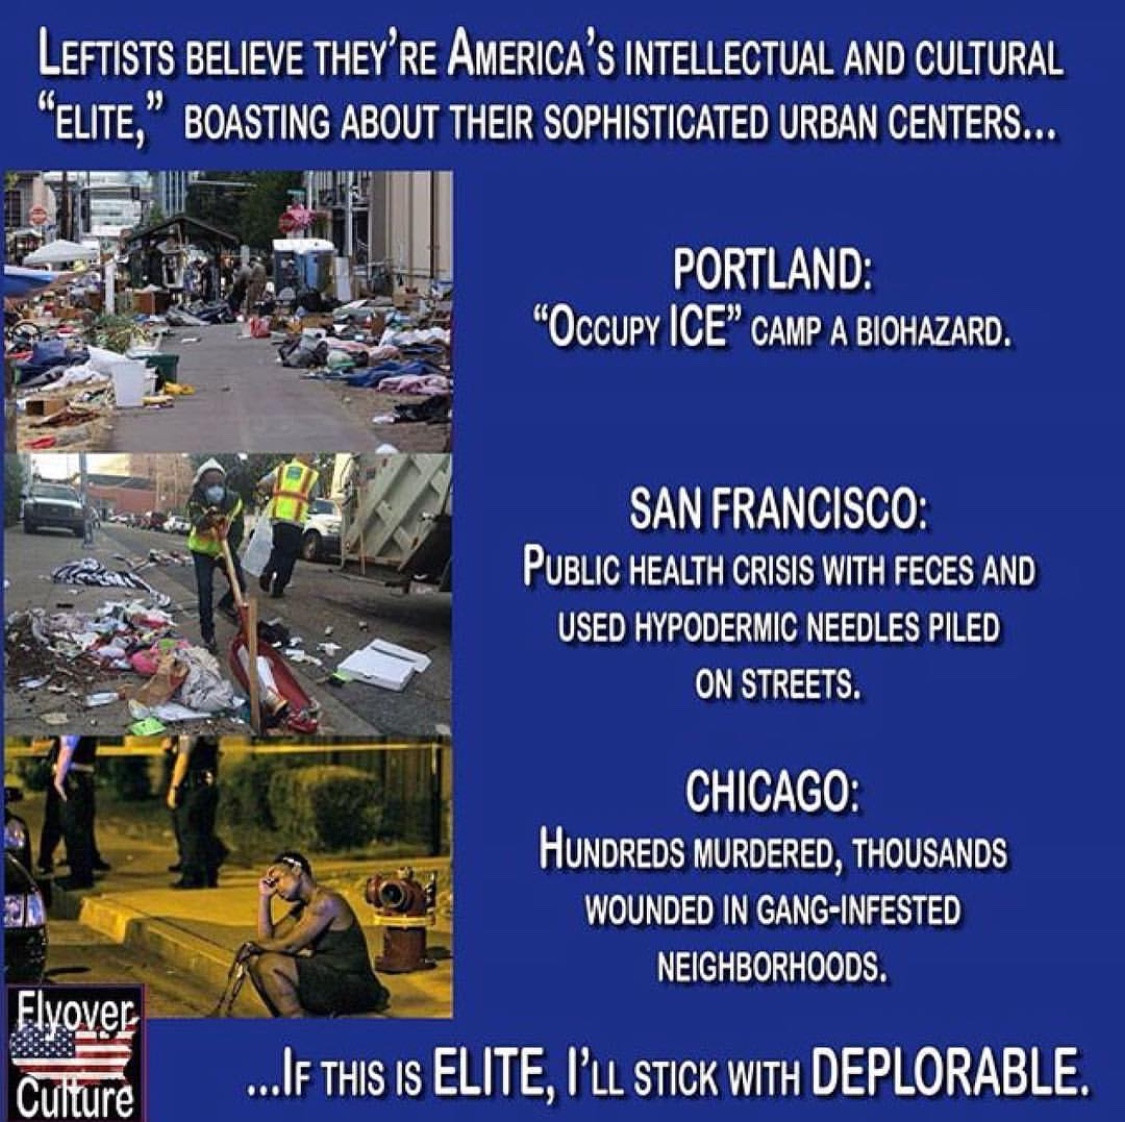 vehicle - Leftists Believe They'Re America'S Intellectual And Cultural "Elite," Boasting About Their Sophisticated Urban Centers... Portland "Occupy Ice Camp A Biohazard. San Francisco Public Health Crisis With Feces And Used Hypodermic Needles Piled On S